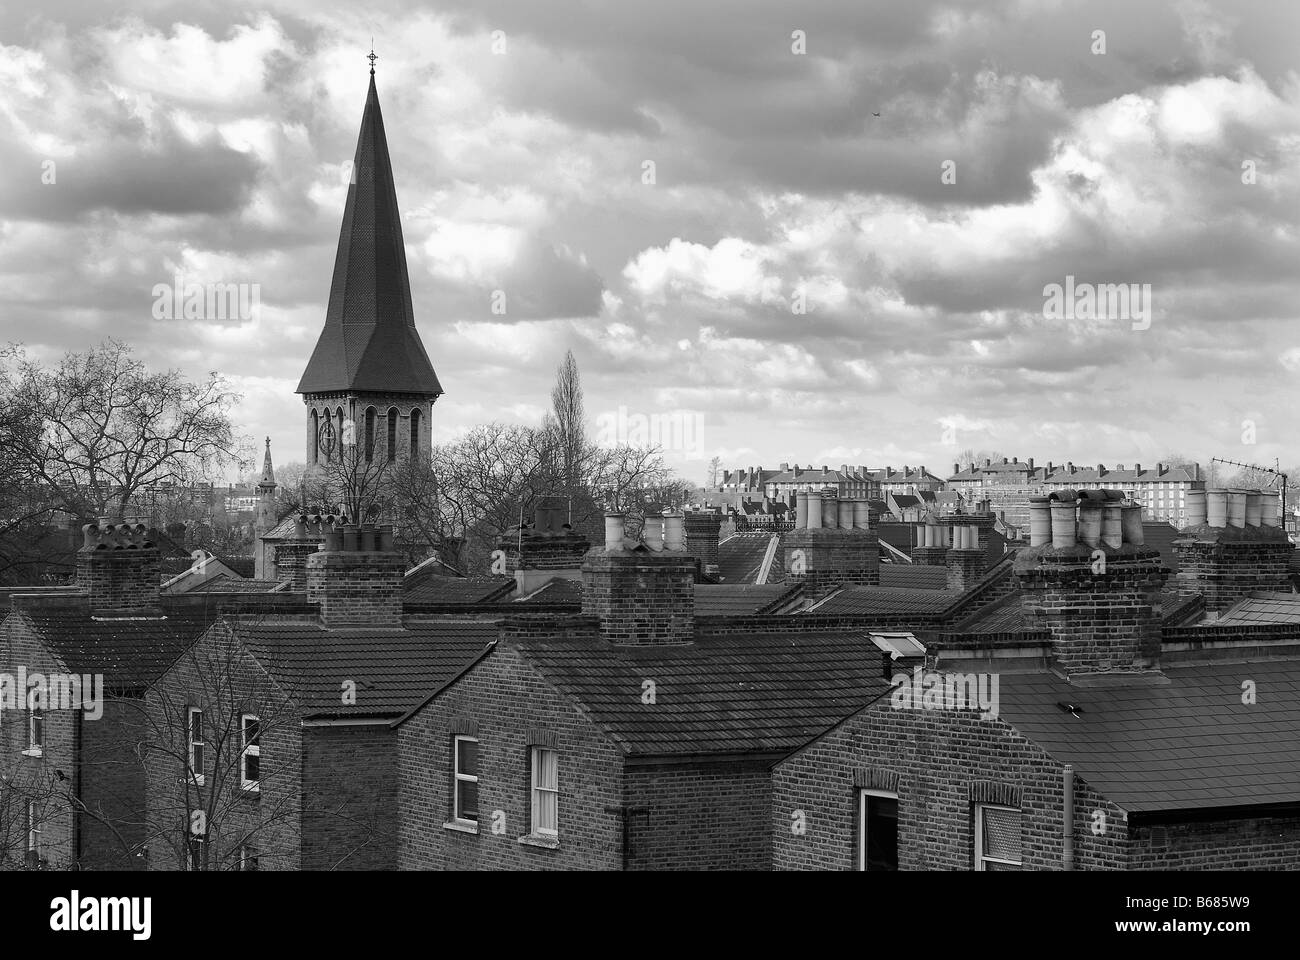 View of terraced houses in East Dulwich, South London, UK, including St John's Church spire Stock Photo